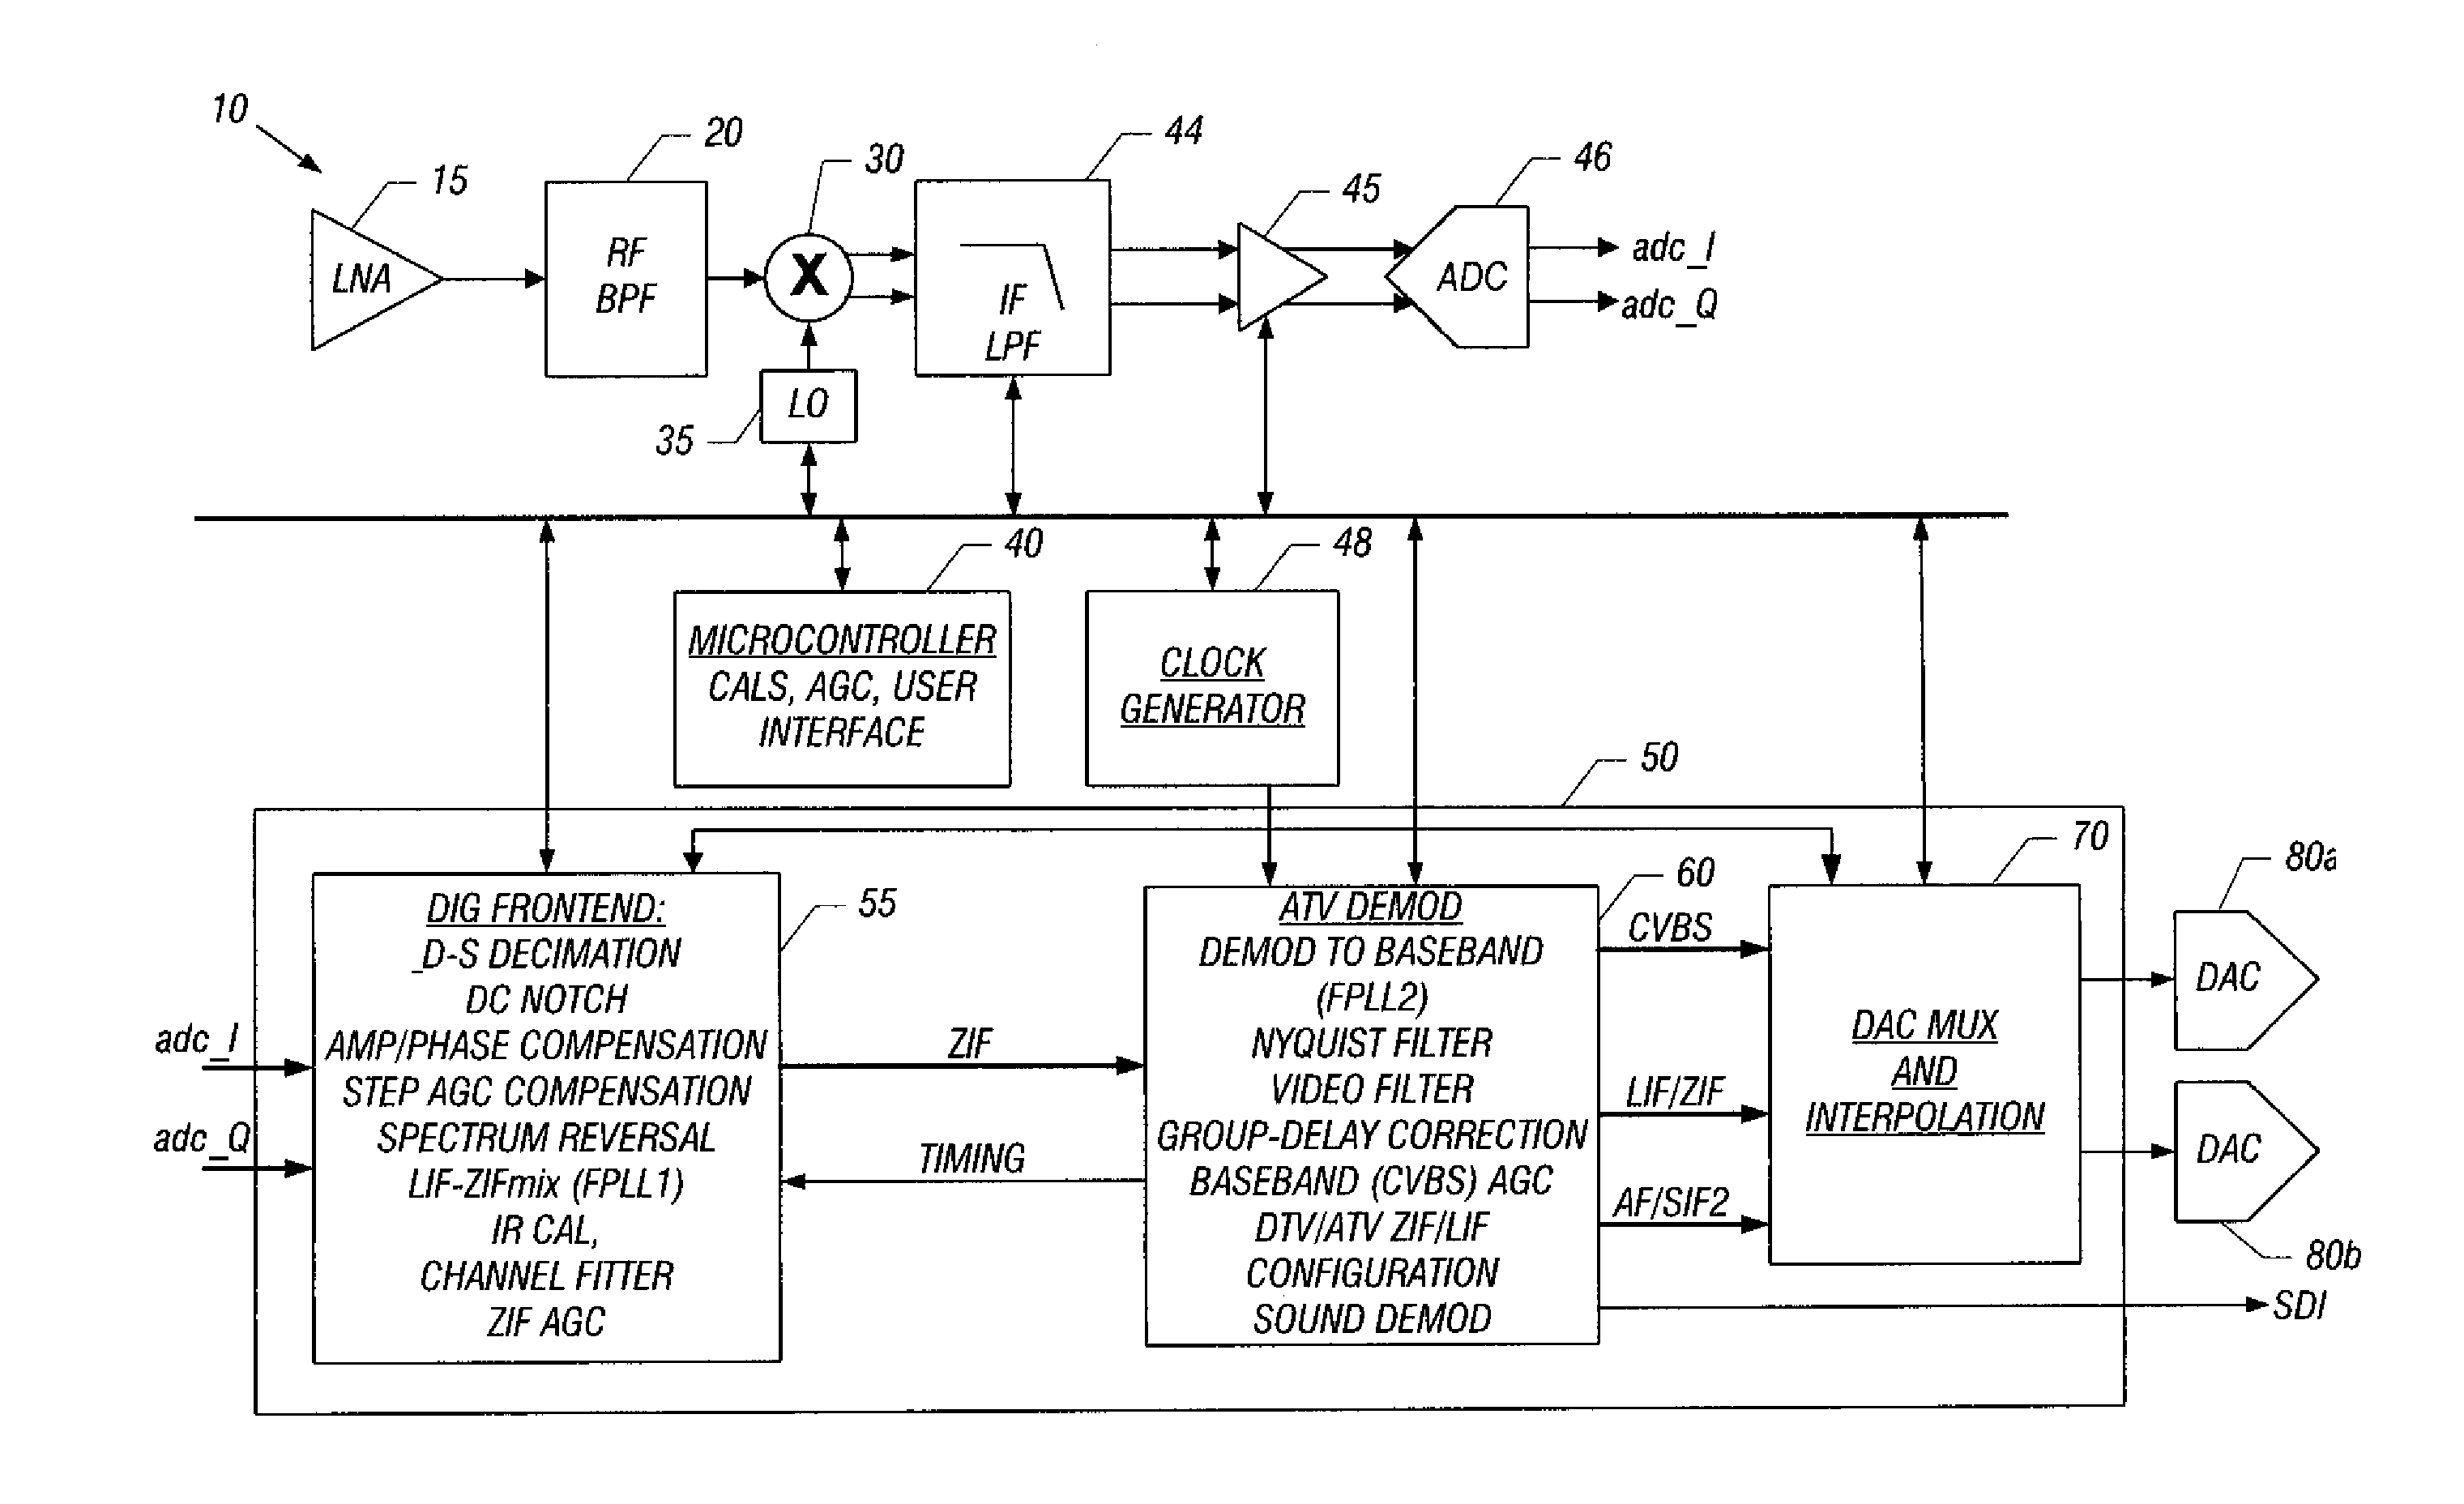 Digital Signal Processor (DSP) Architecture For A Hybrid Television Tuner